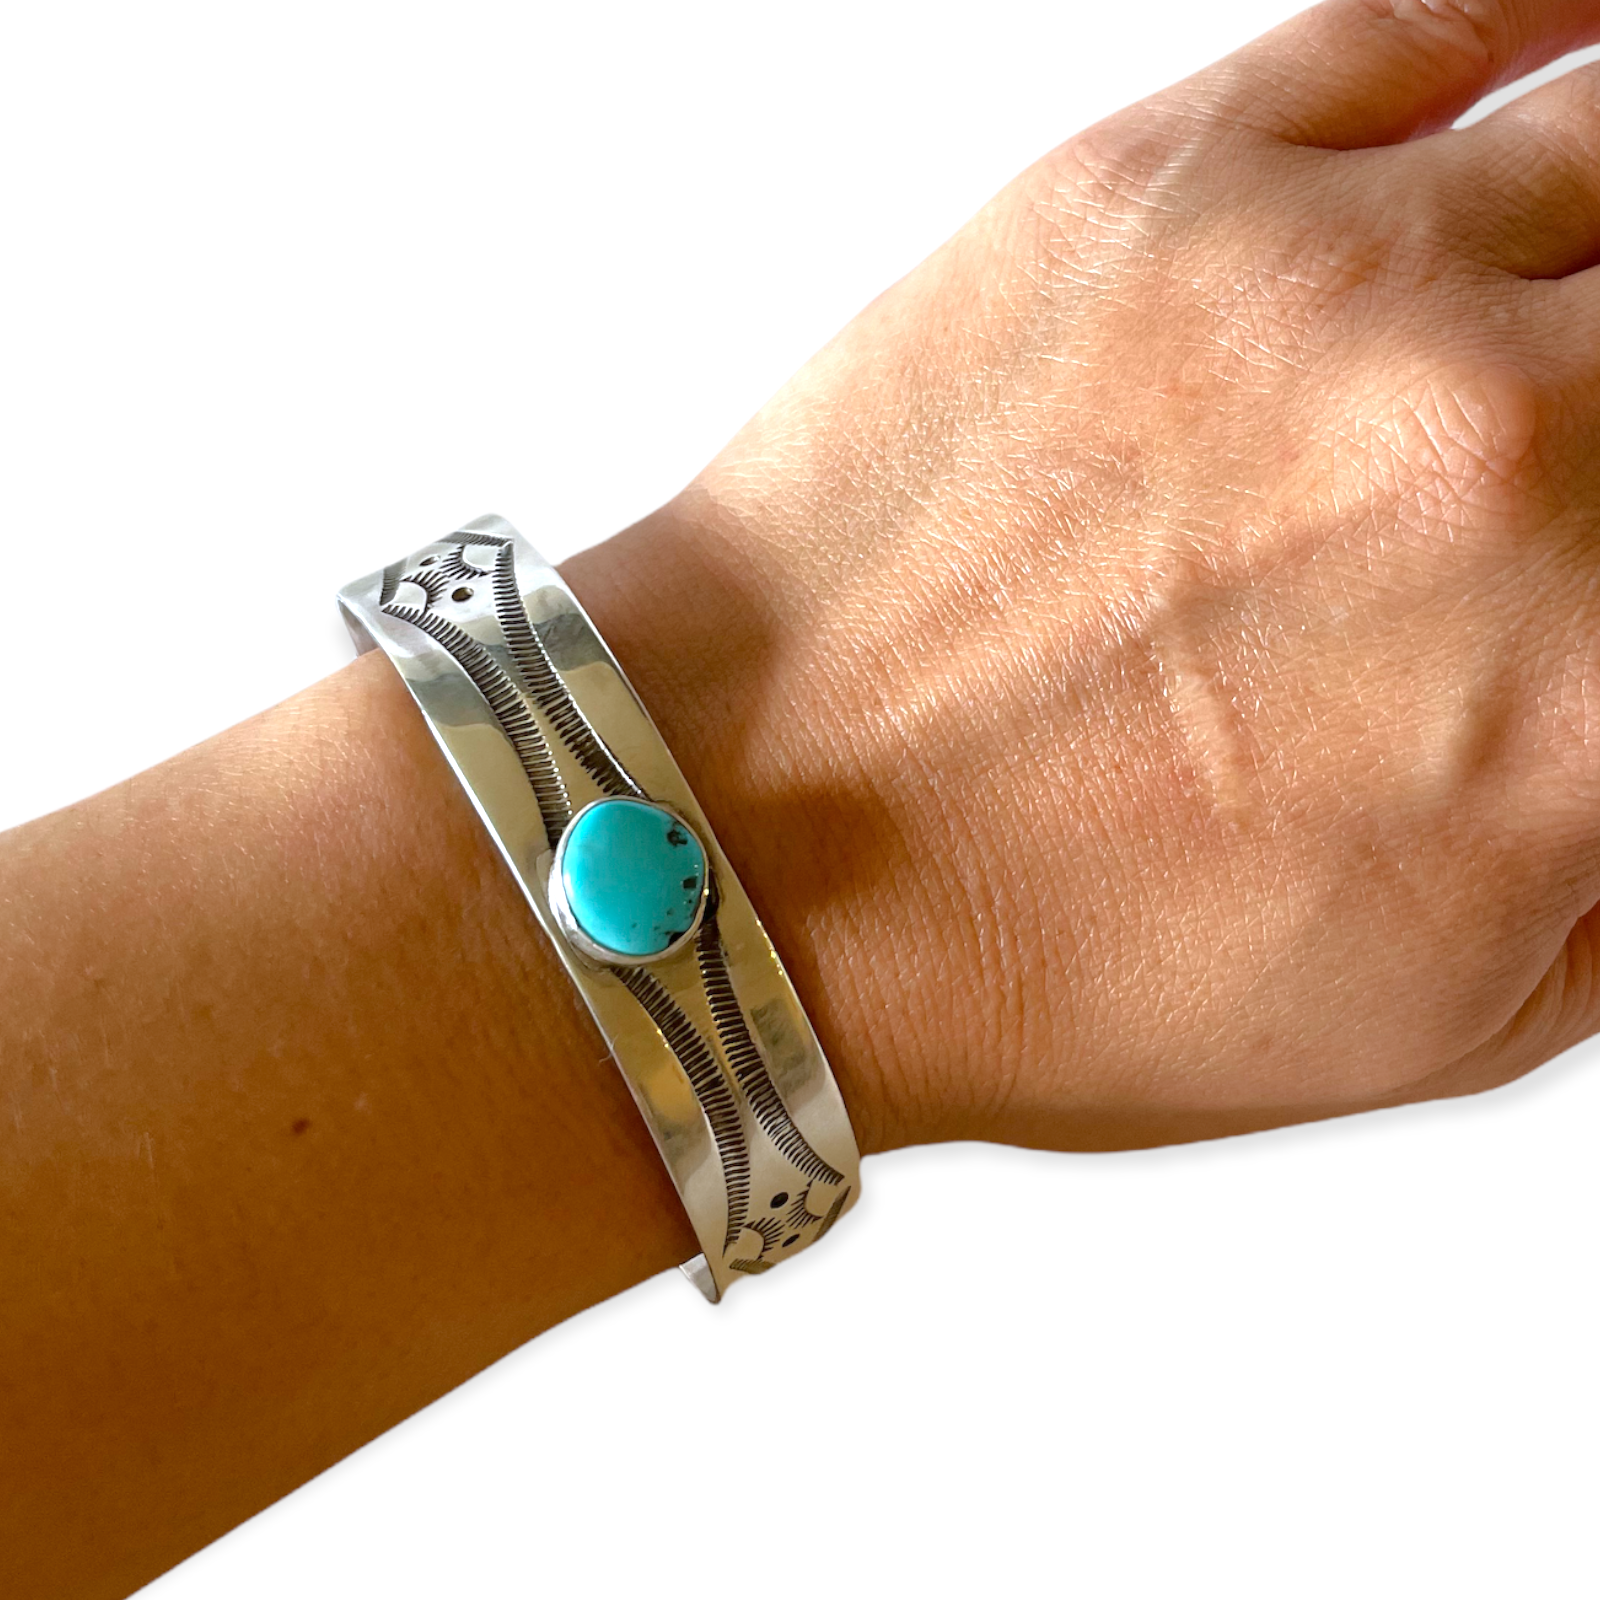 Stamped Sterling Silver Cuff Bracelet with Sleeping Beauty Turquoise |  Handmade by Arnold Goodluck – SOUTHWEST SUNRISE